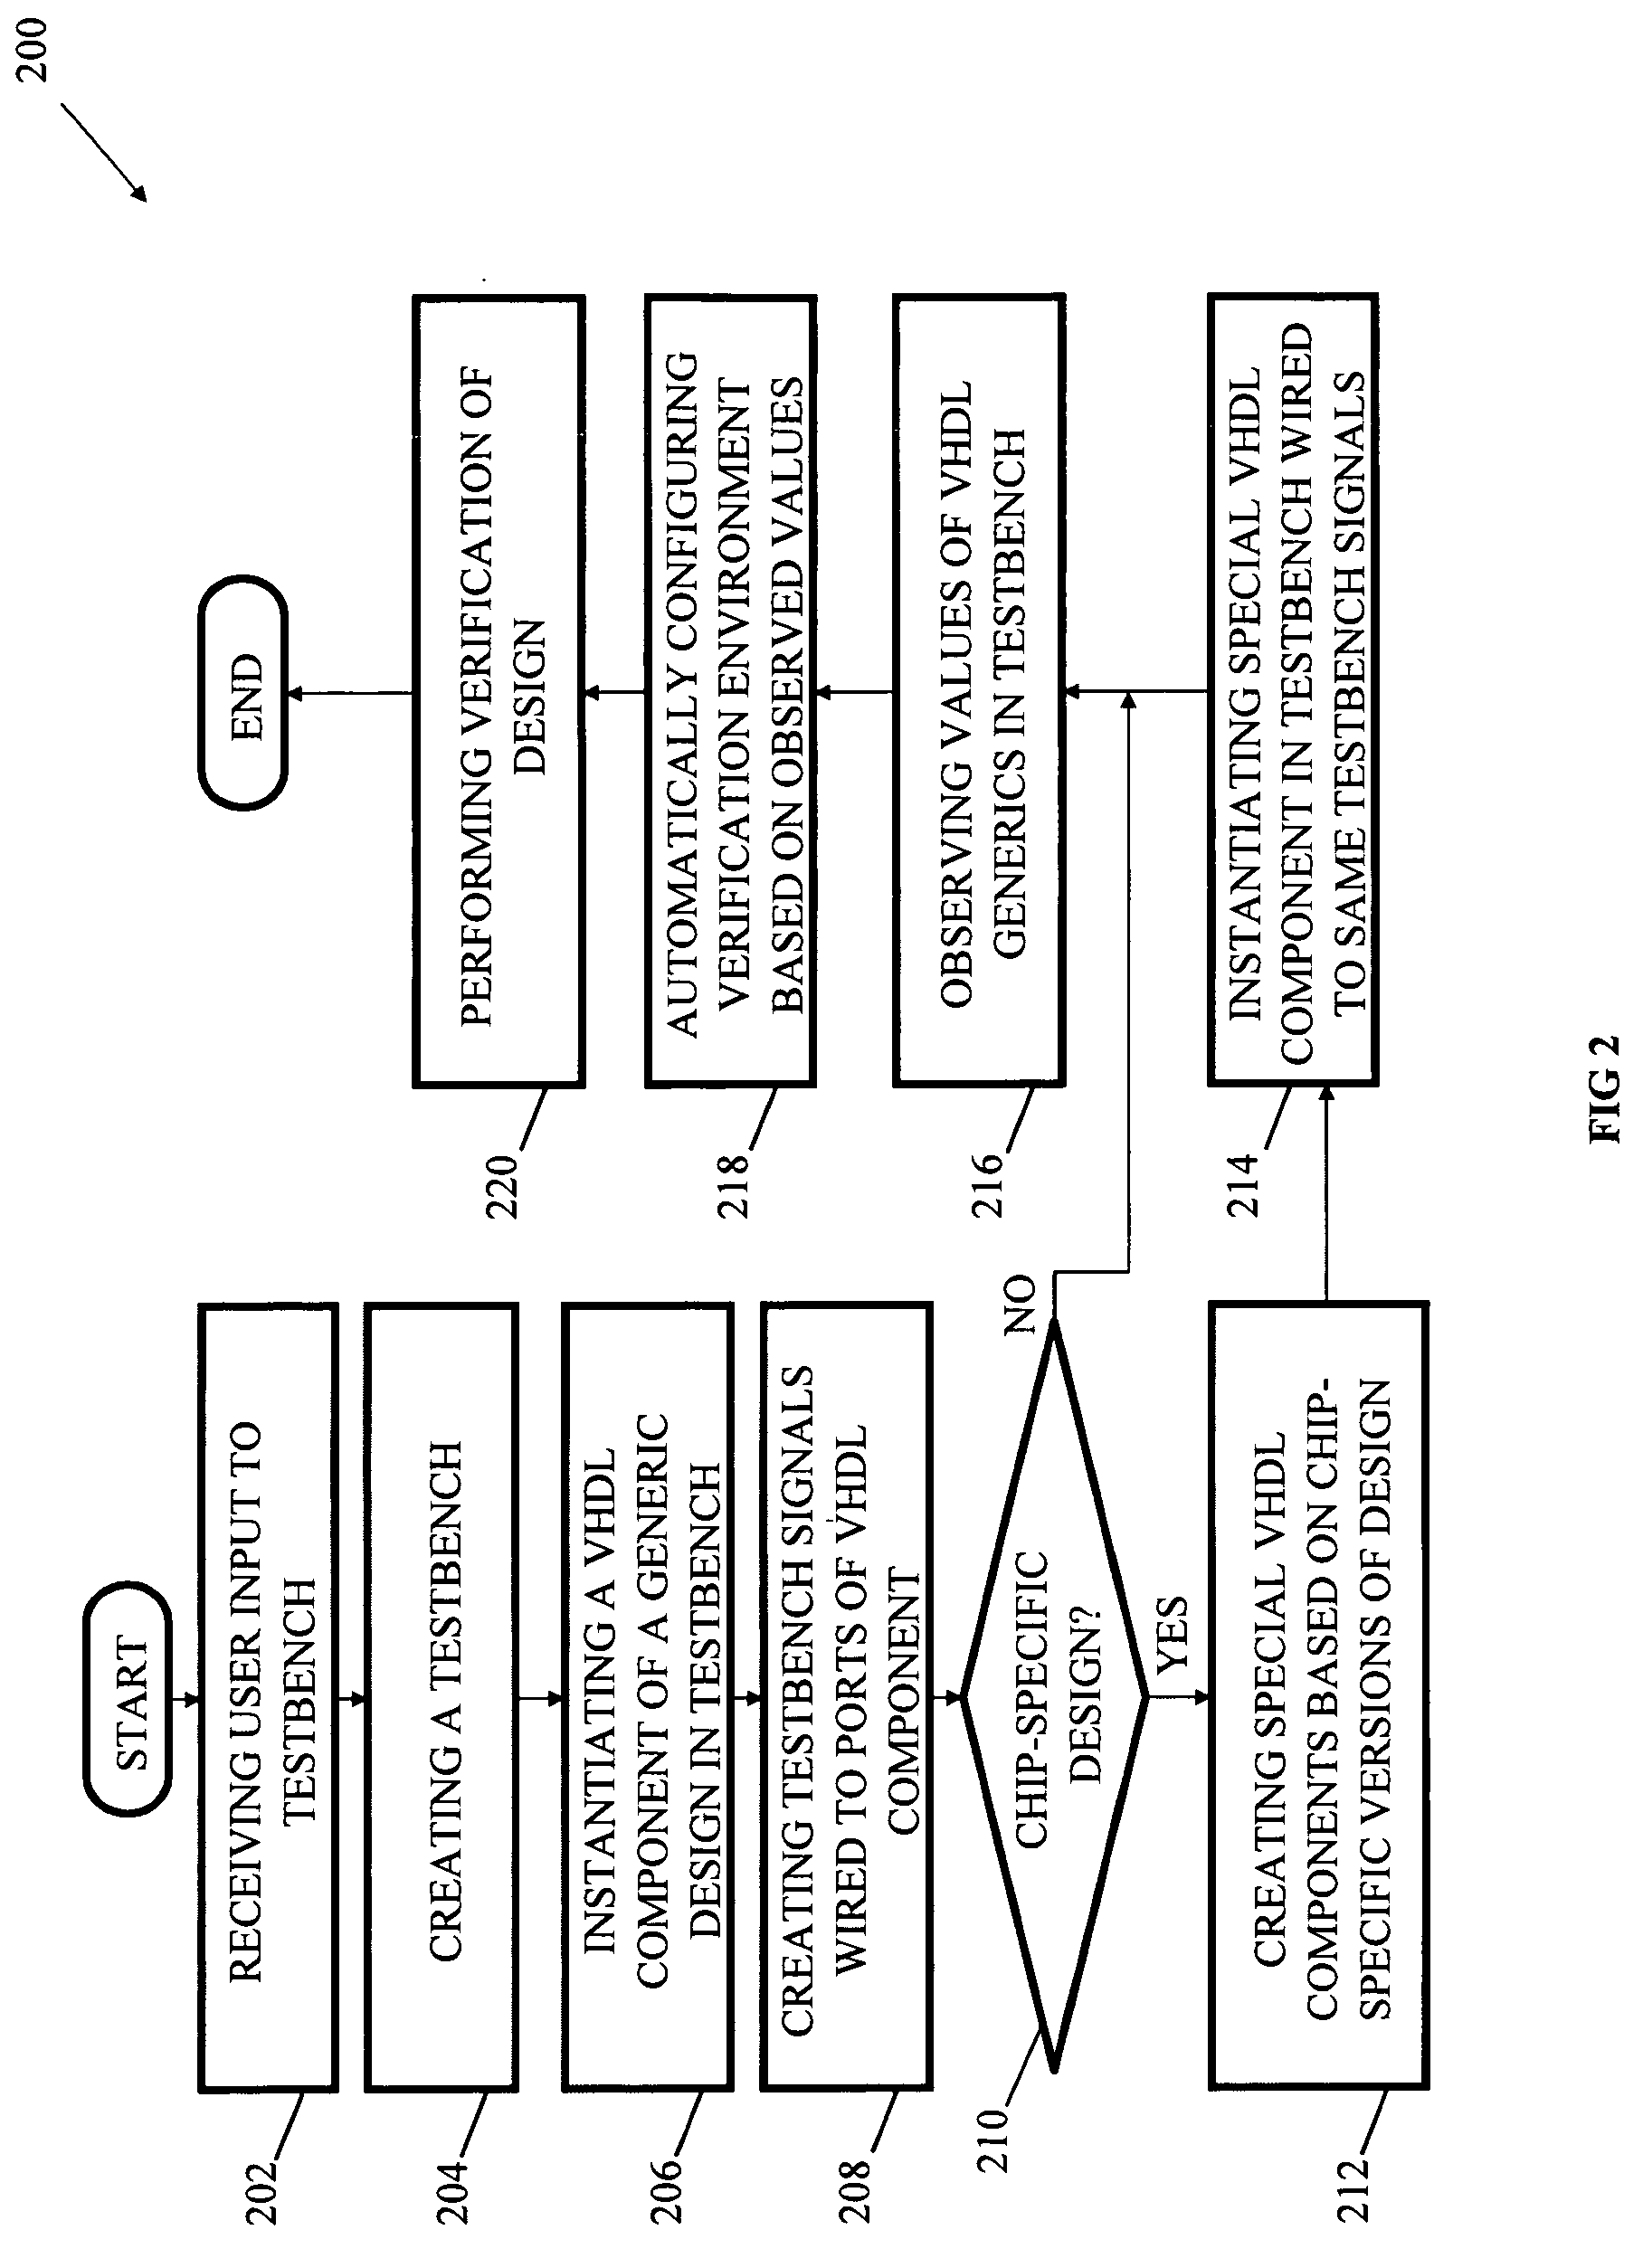 Methods, systems and media for managing functional verification of a parameterizable design